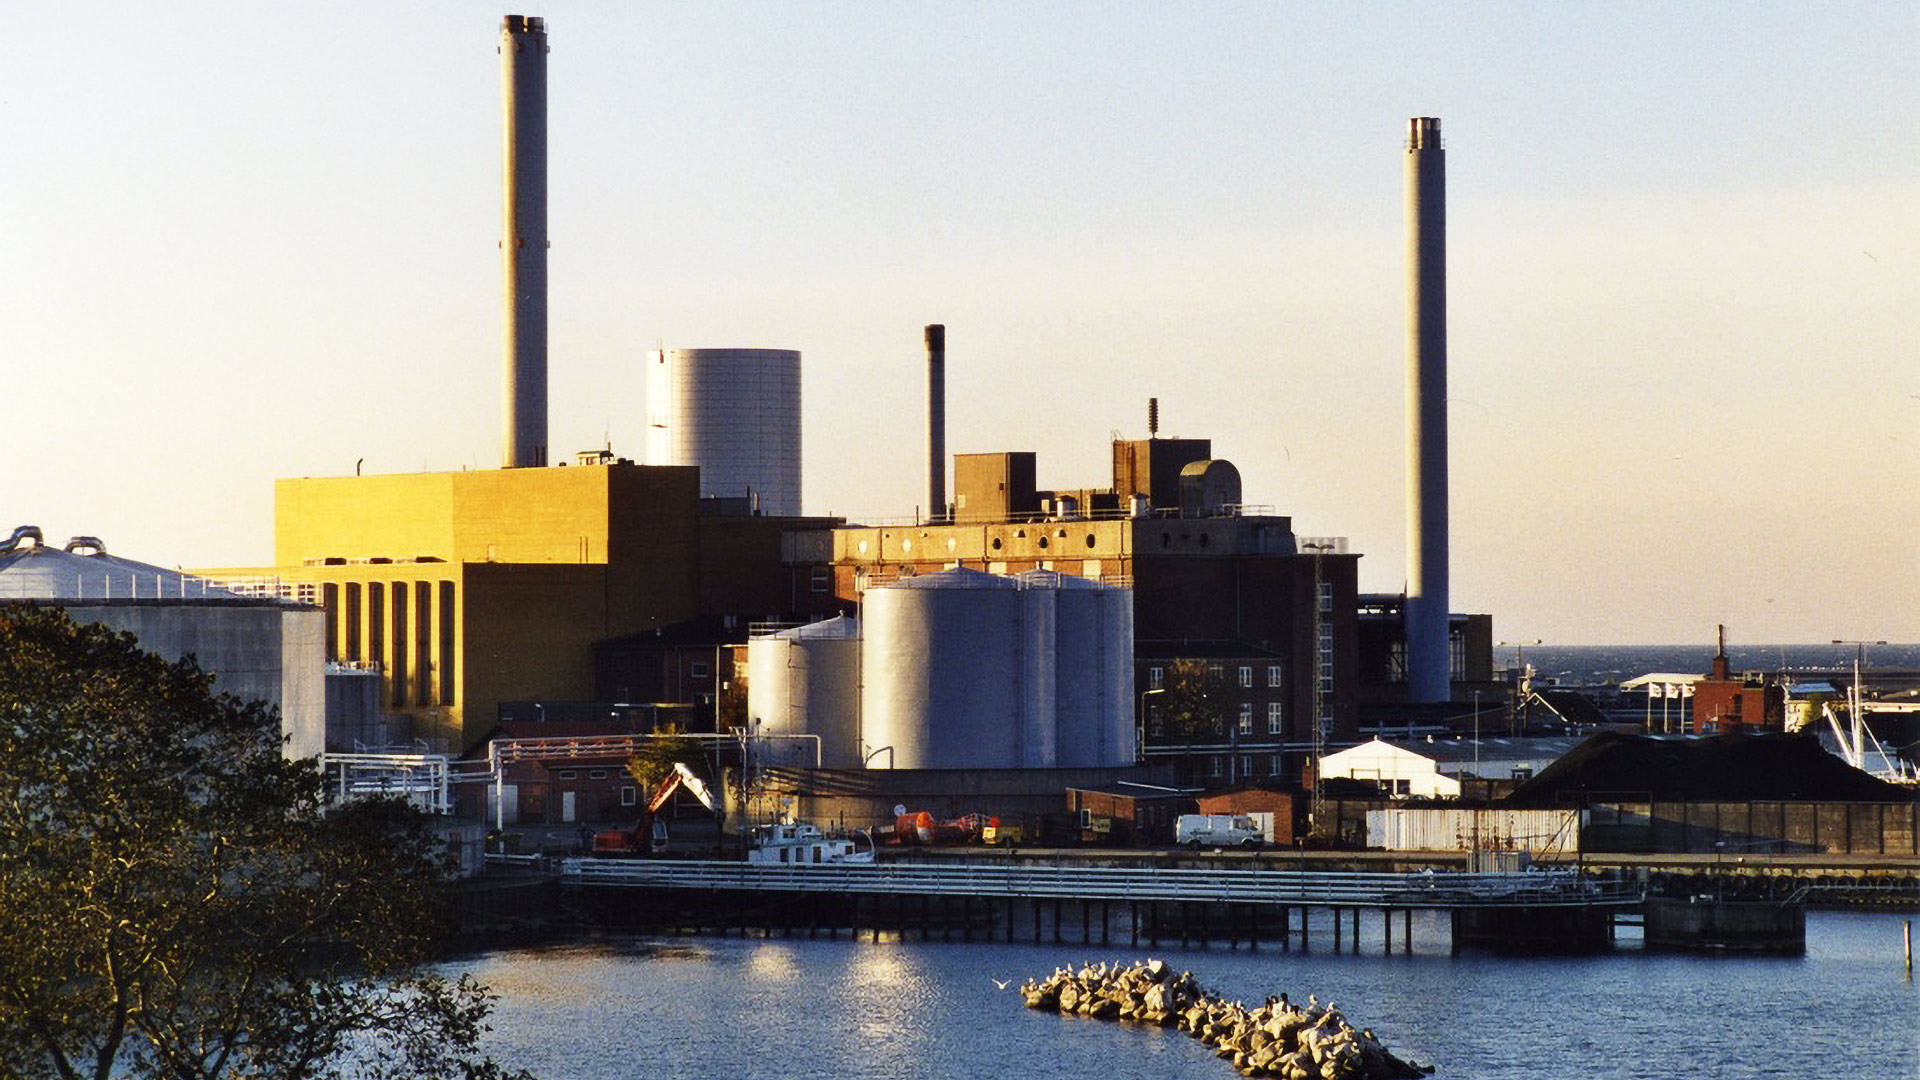 A biomass combustion plant owned and operated by Bornholms Energi & Forsyning